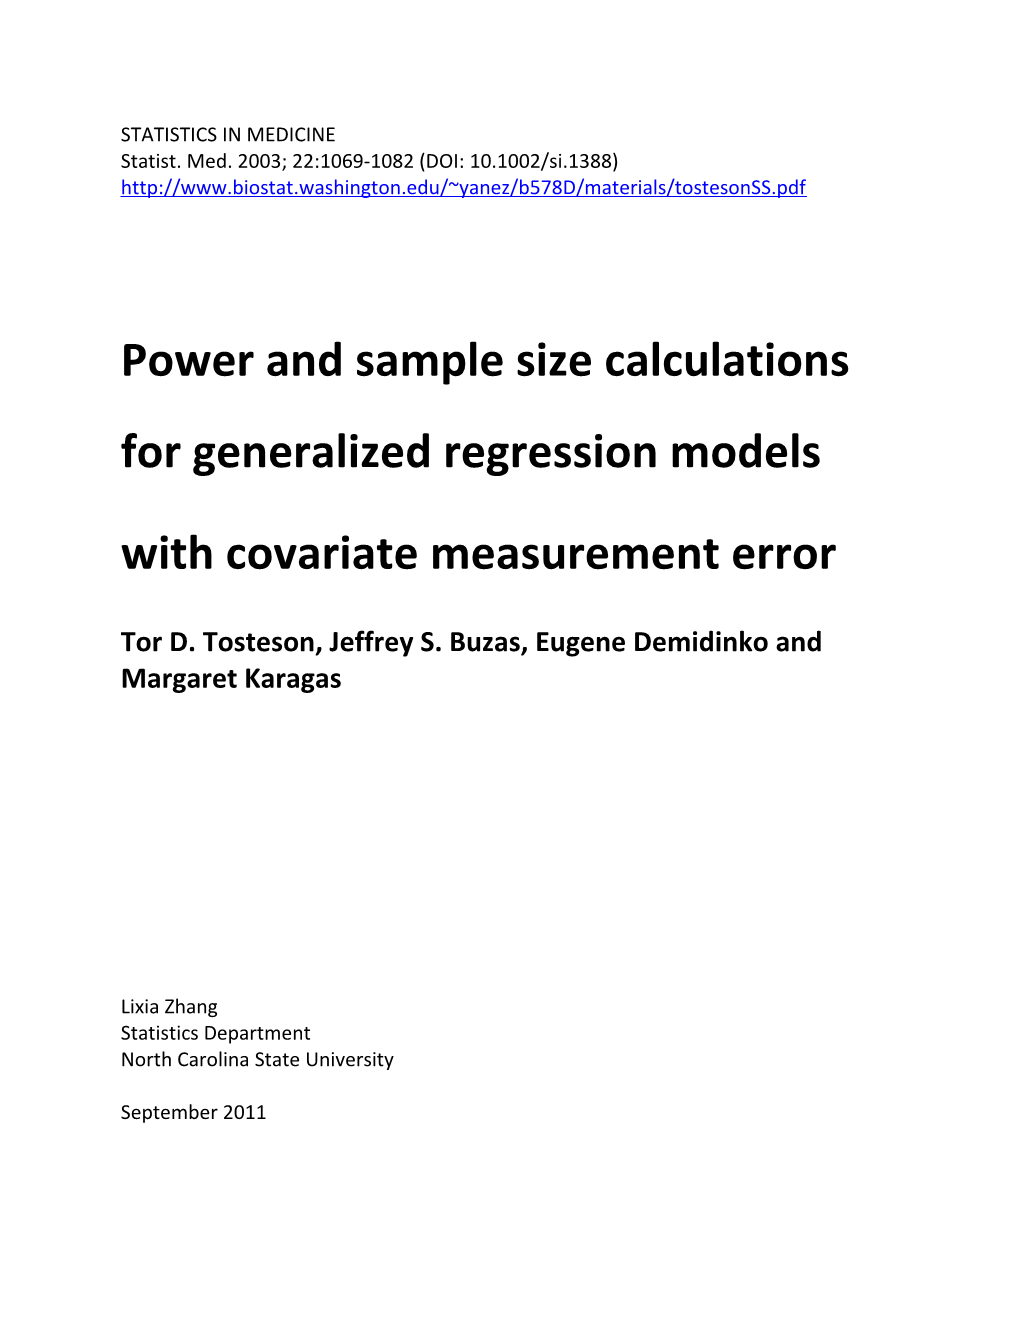 Power and Sample Size Calculations for Generalized Regression Models